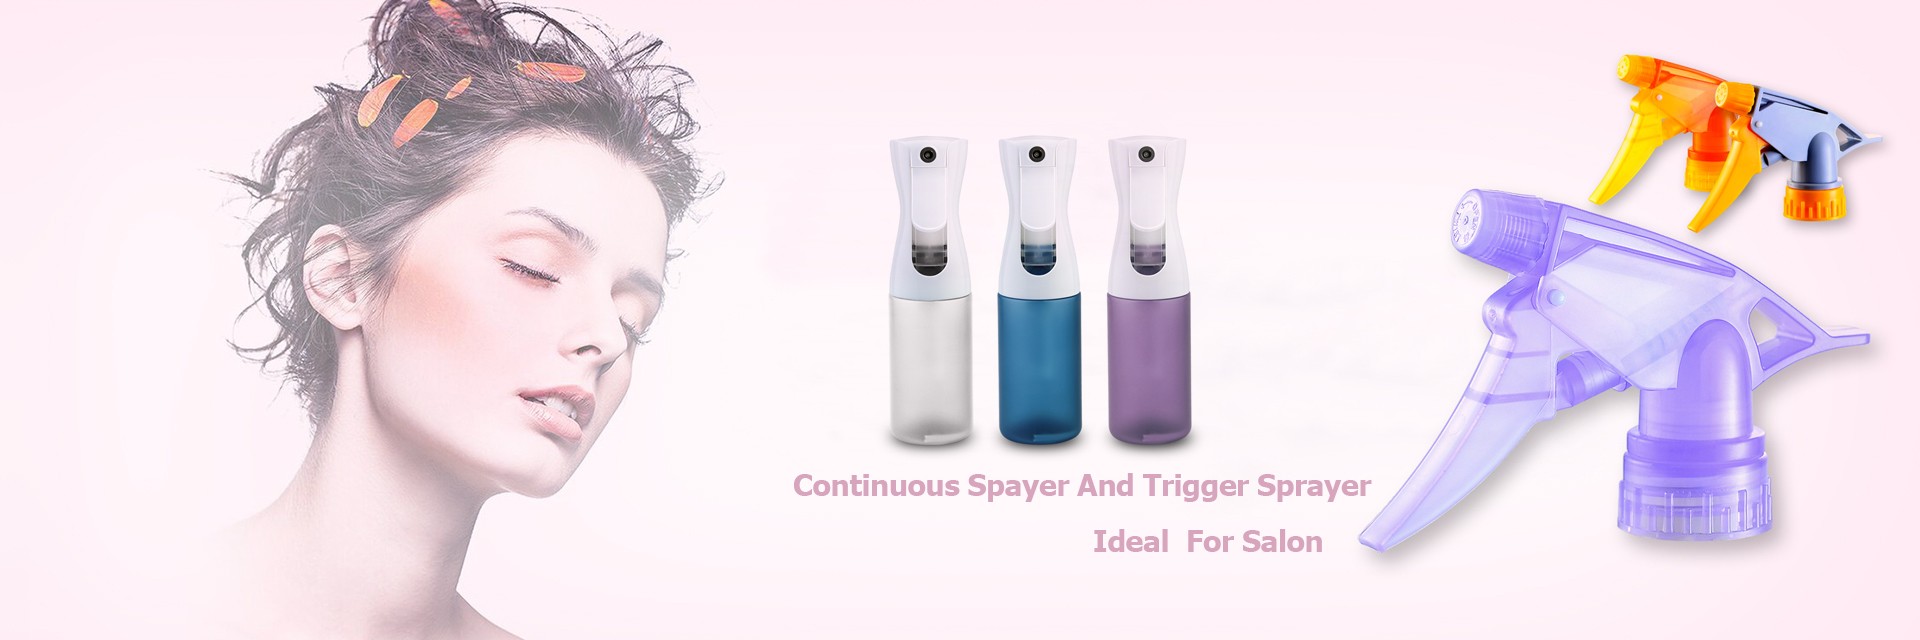 Triggers And Sprayers